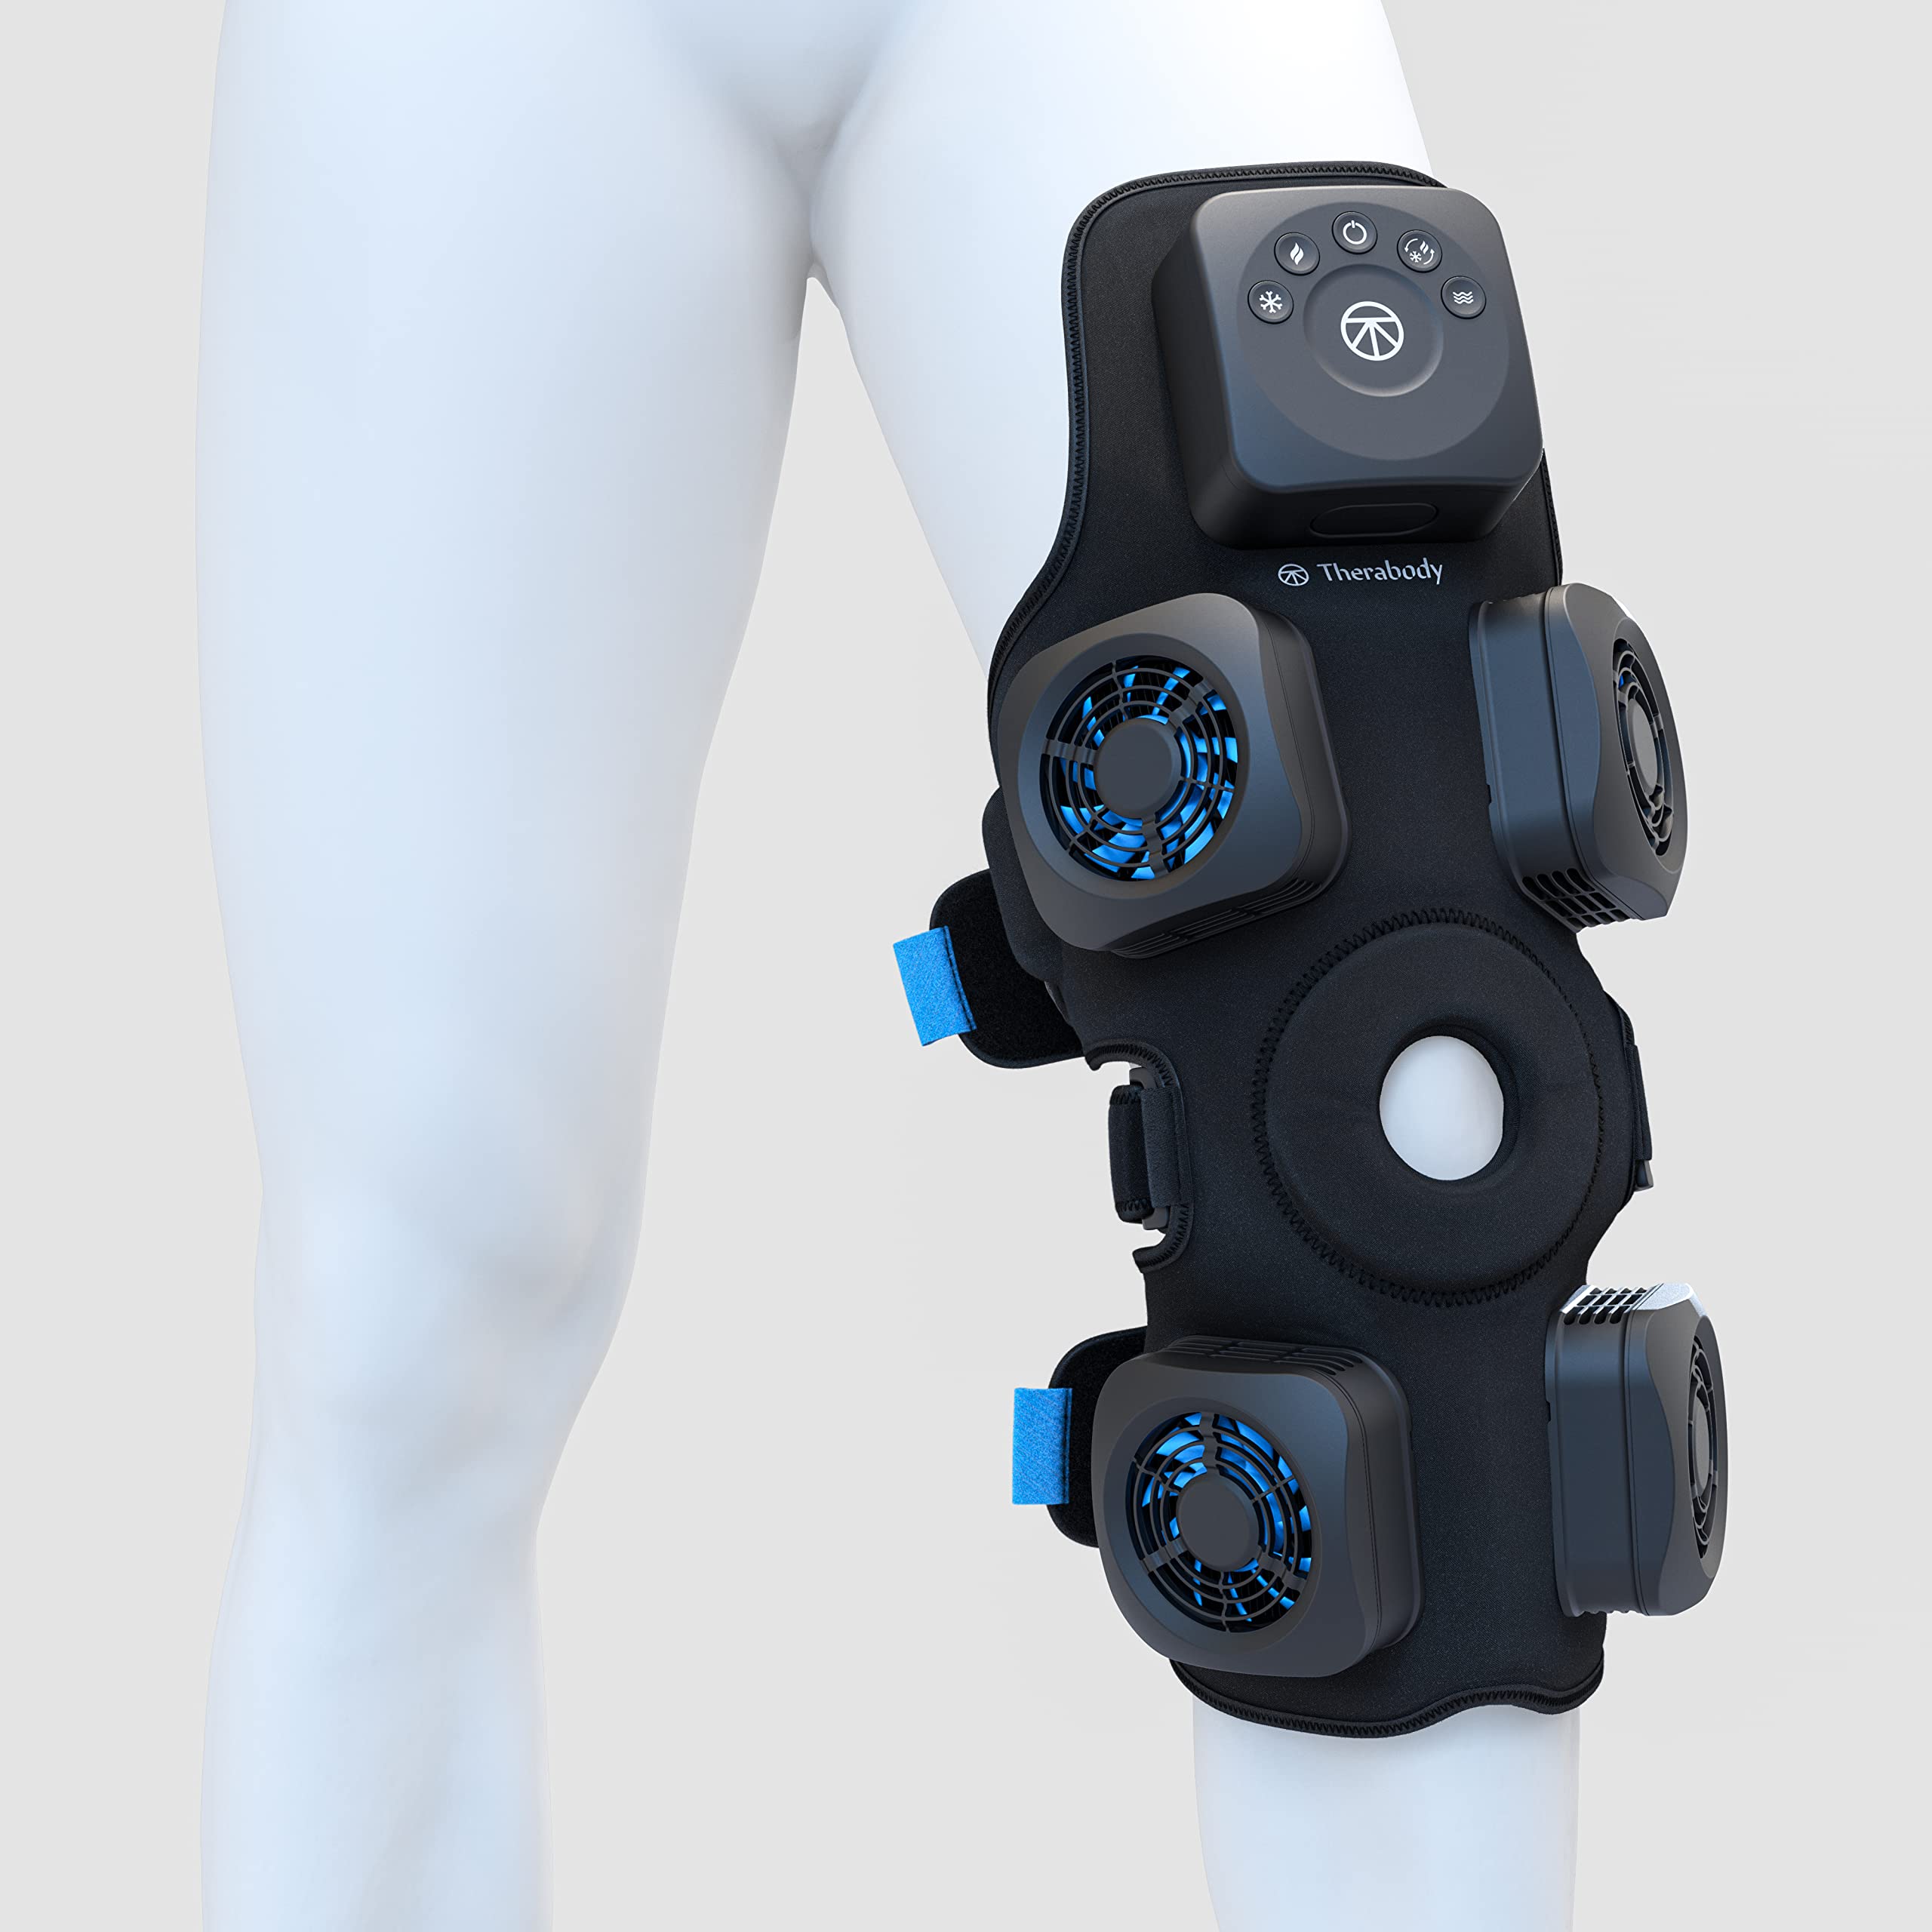 RecoveryTherm Knee - Contrast Therapy Wrap - Hot & Cold Vibration Recovery Knee Wrap for Athletes - Advanced Contrast Therapy for Knee Pain Relief Wrap with Cryothermal Technology - One Size Fits All